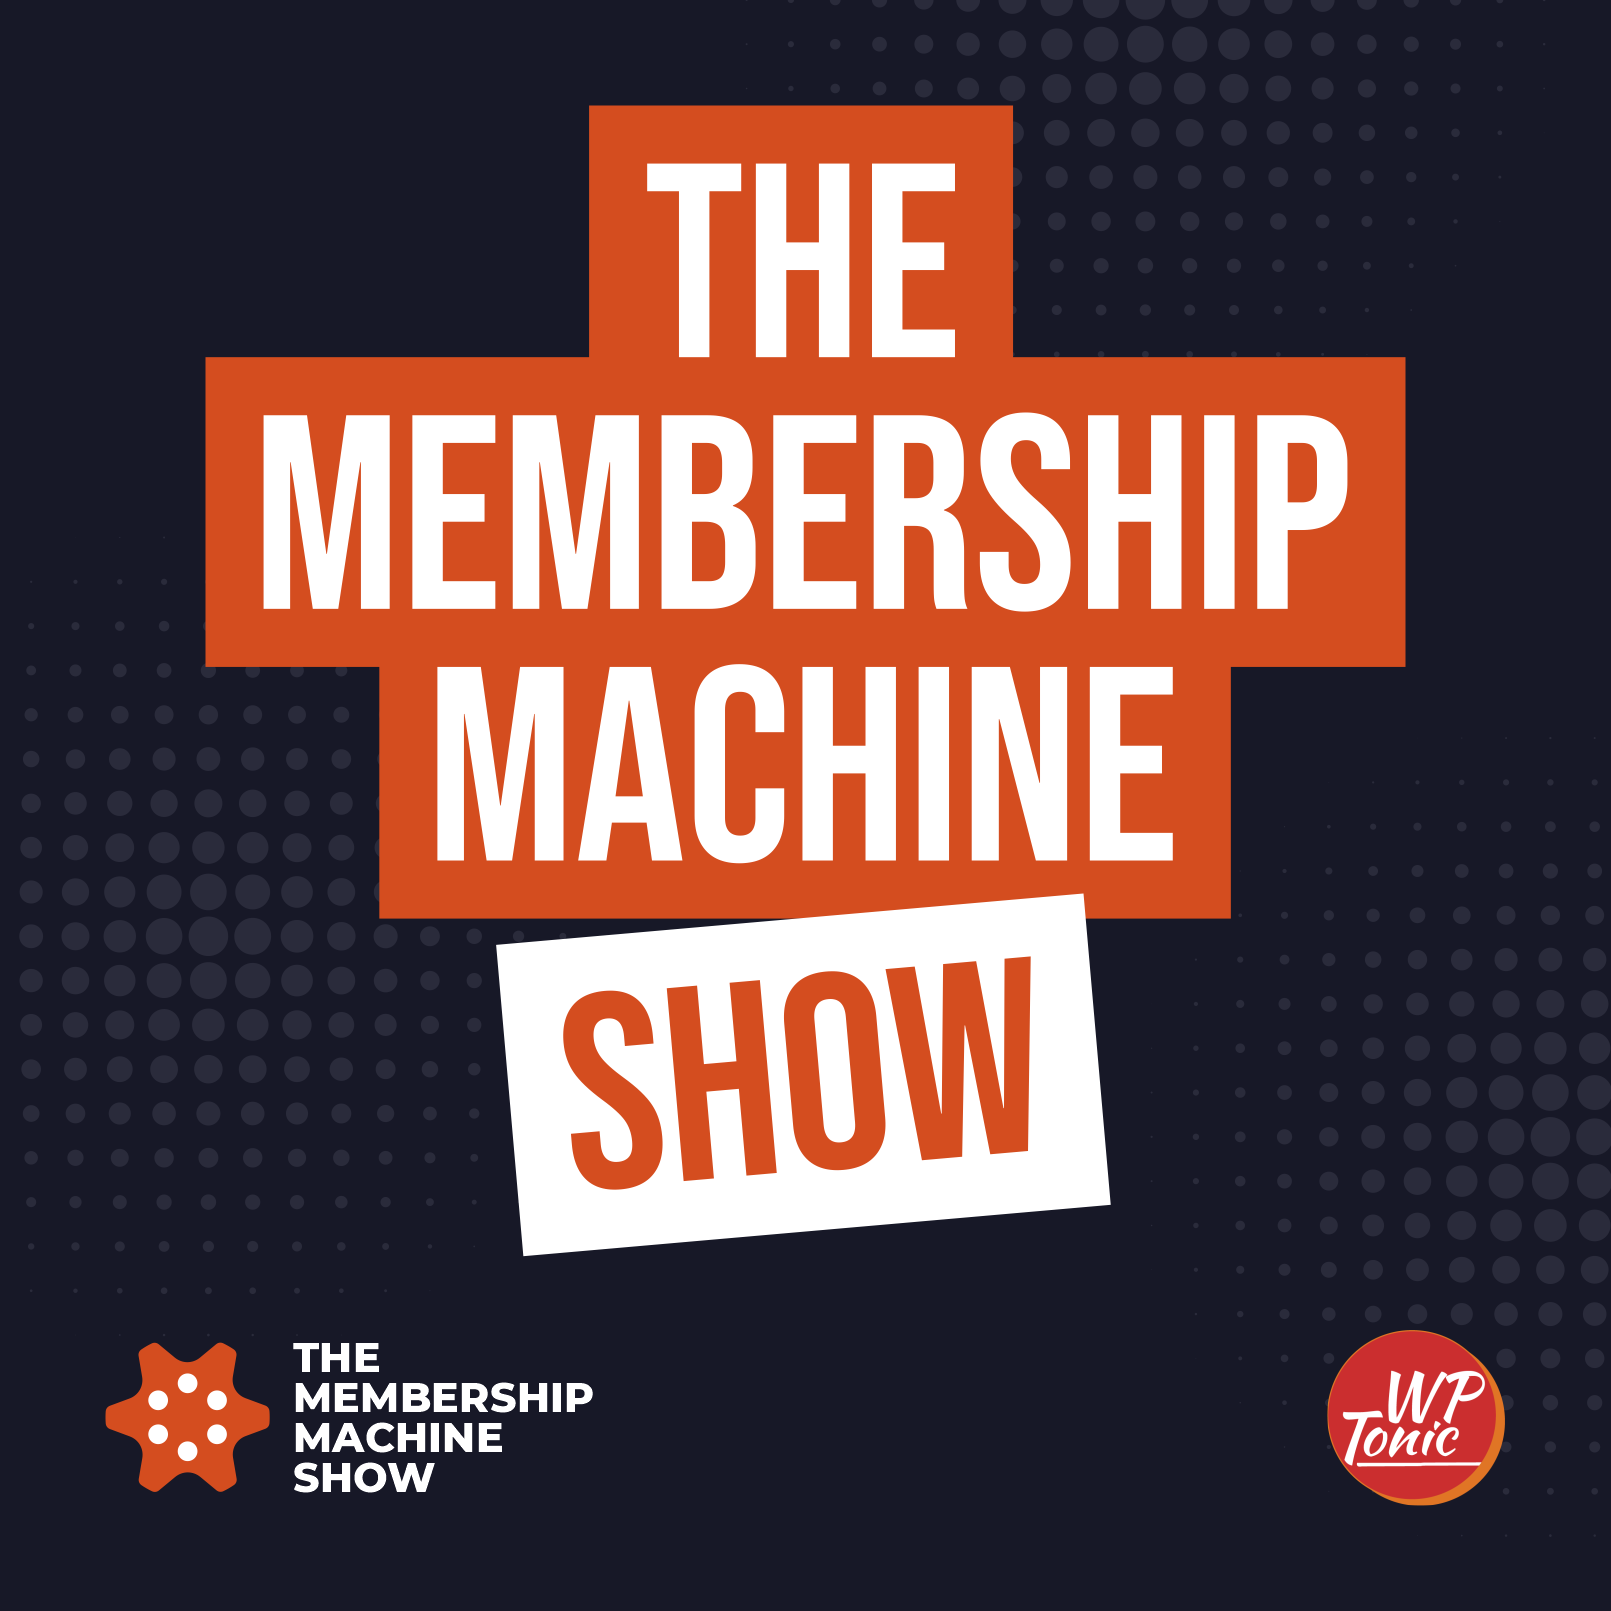 18 -The Membership Machine Show: What Are The Best WordPress Backup and Security Plugin For 2023?